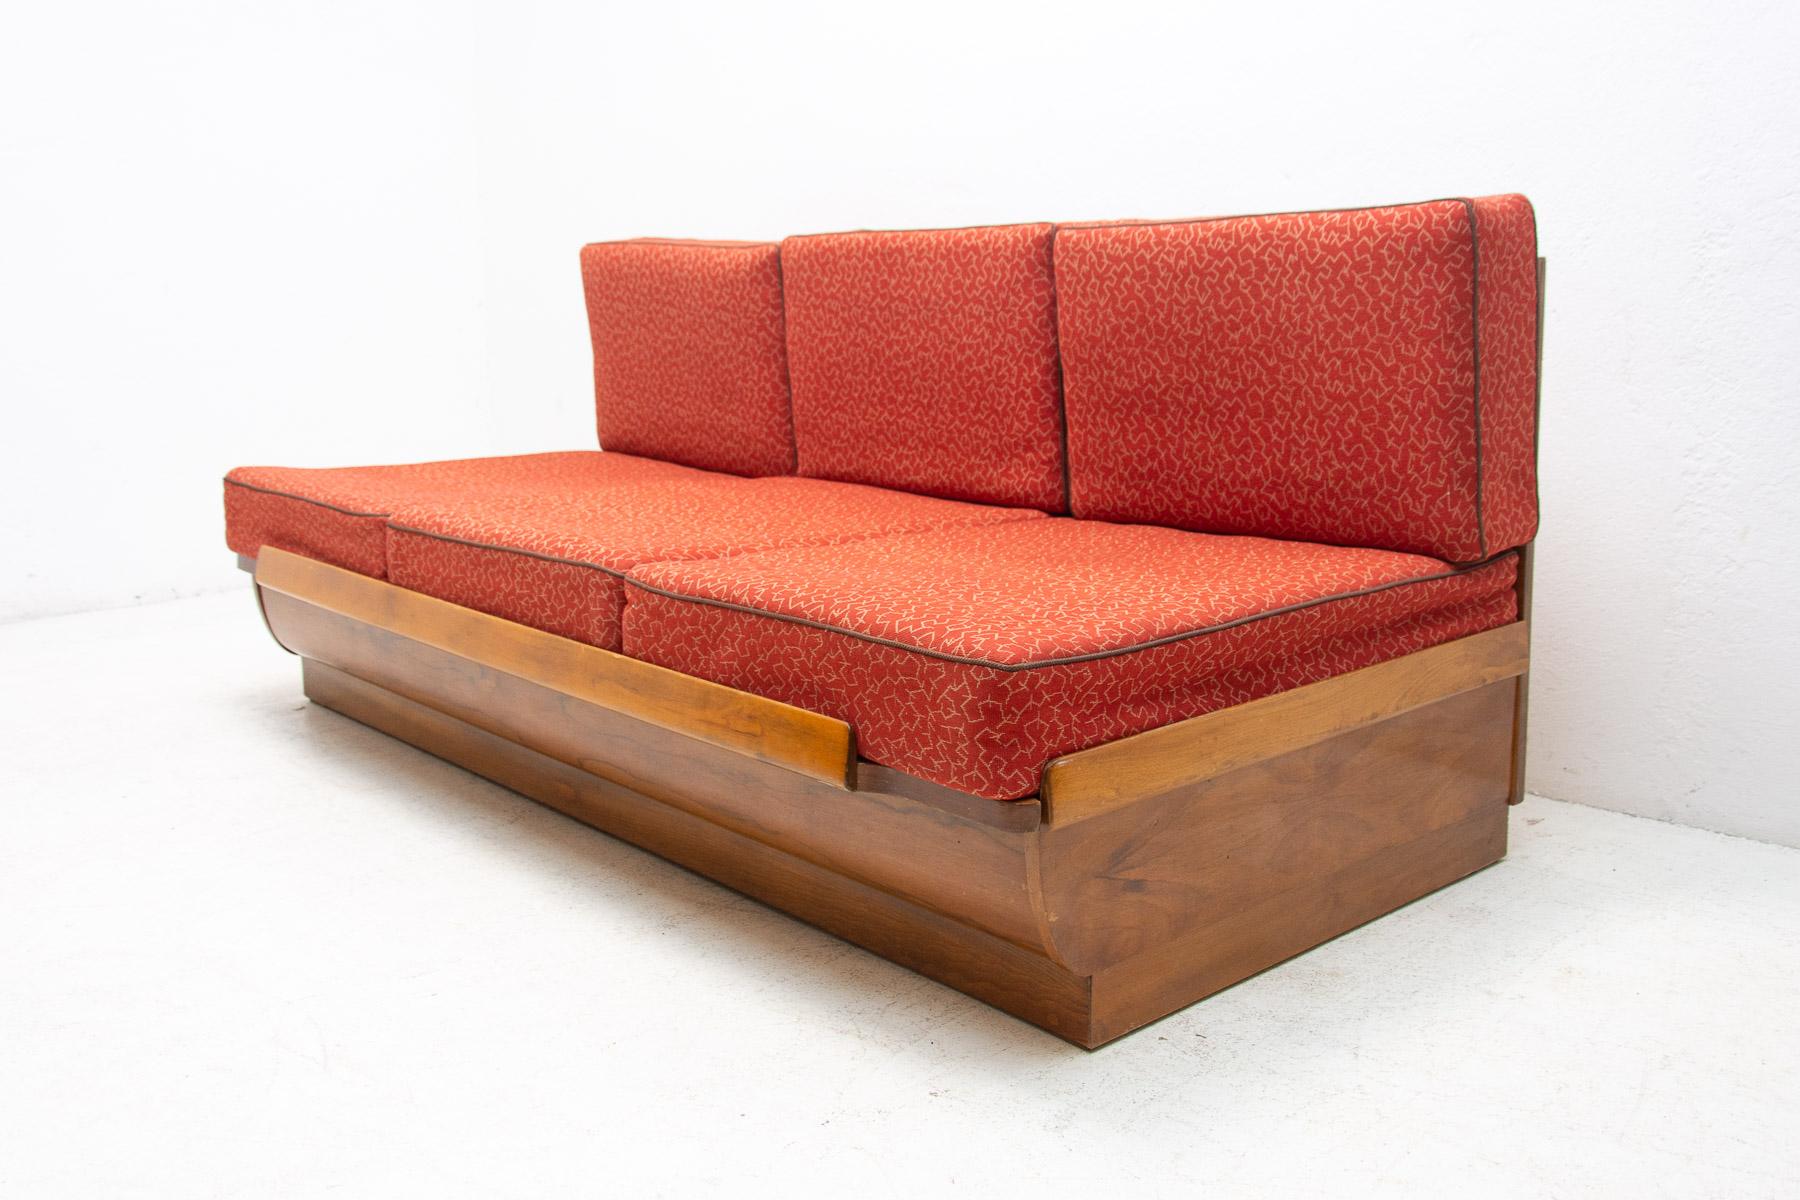 Mid century sofabed designed by Jindrich Halabala for UP Zavody. It was made in the former Czechoslovakia in the 1950´s. This sofa has a walnut veneered wooden structure and storage space for bedding. It´s adjustable for sleeping. The sofa is in